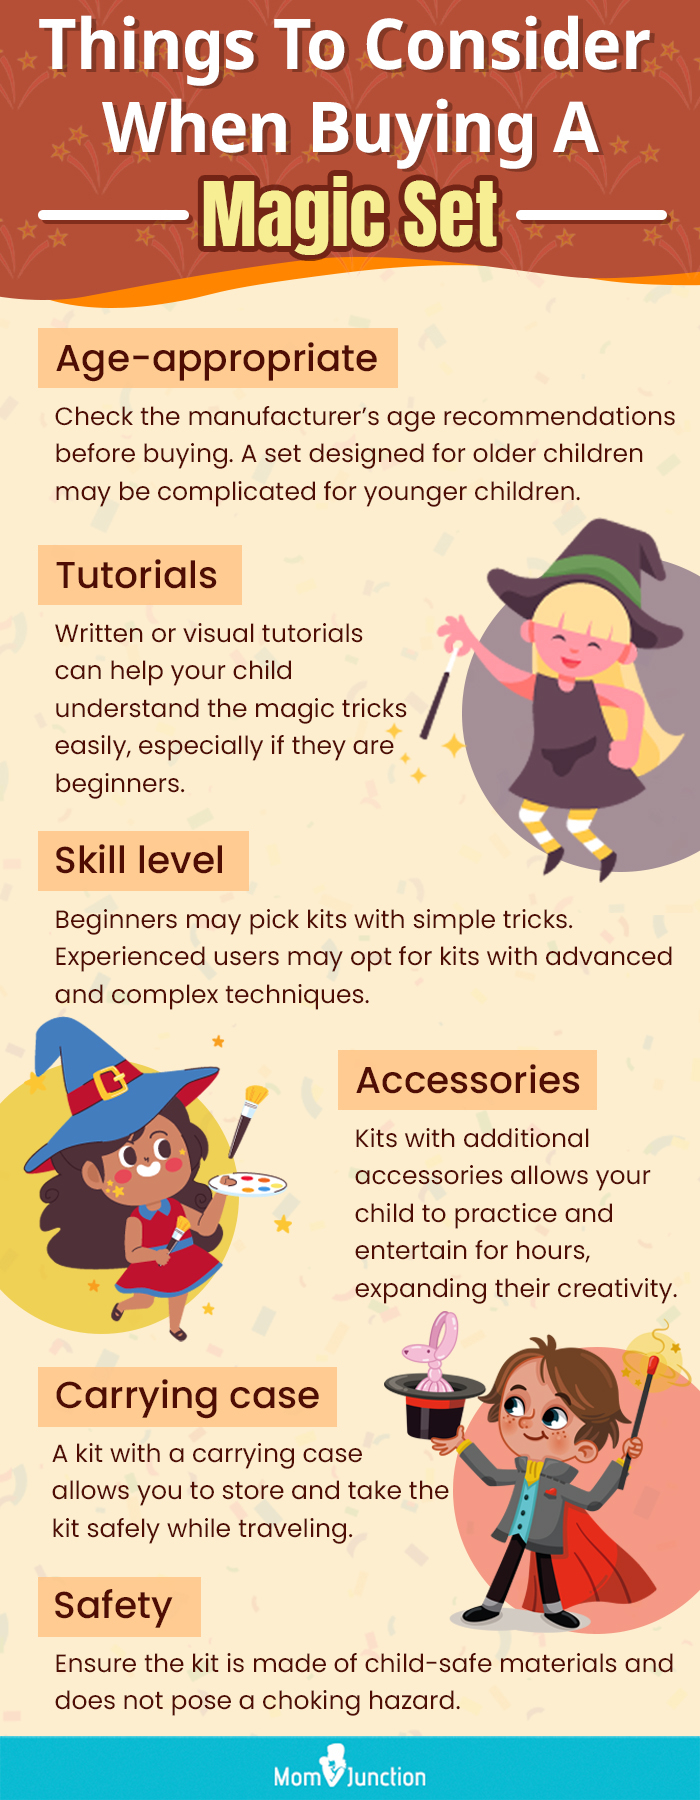 Things To Consider When Buying A Magic Set (Infographic)